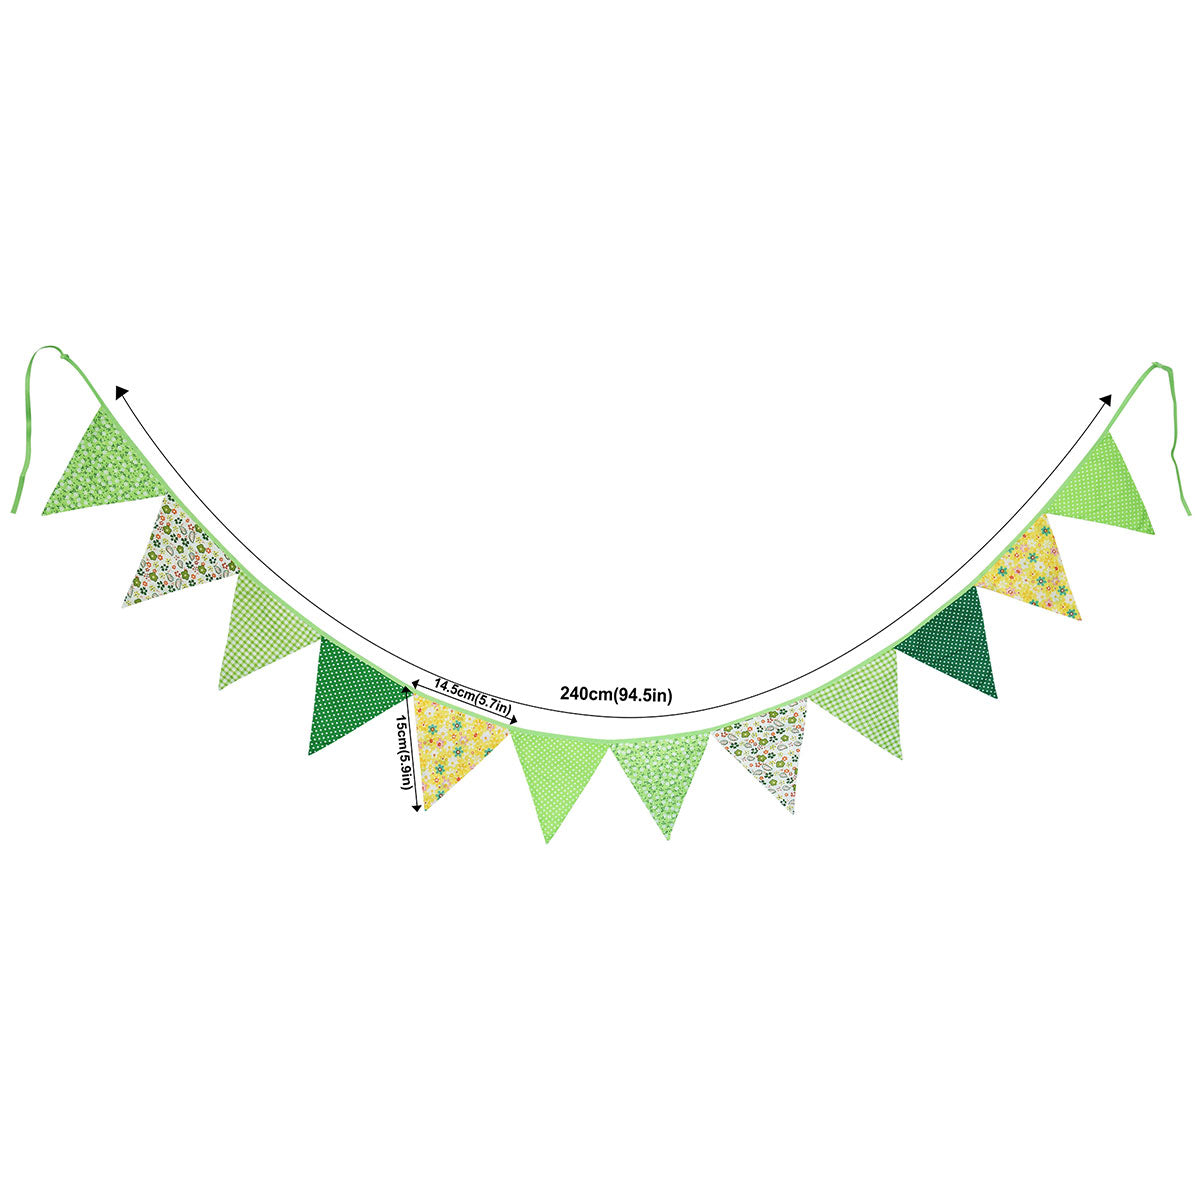 2 Green Cotton Pennant Banners